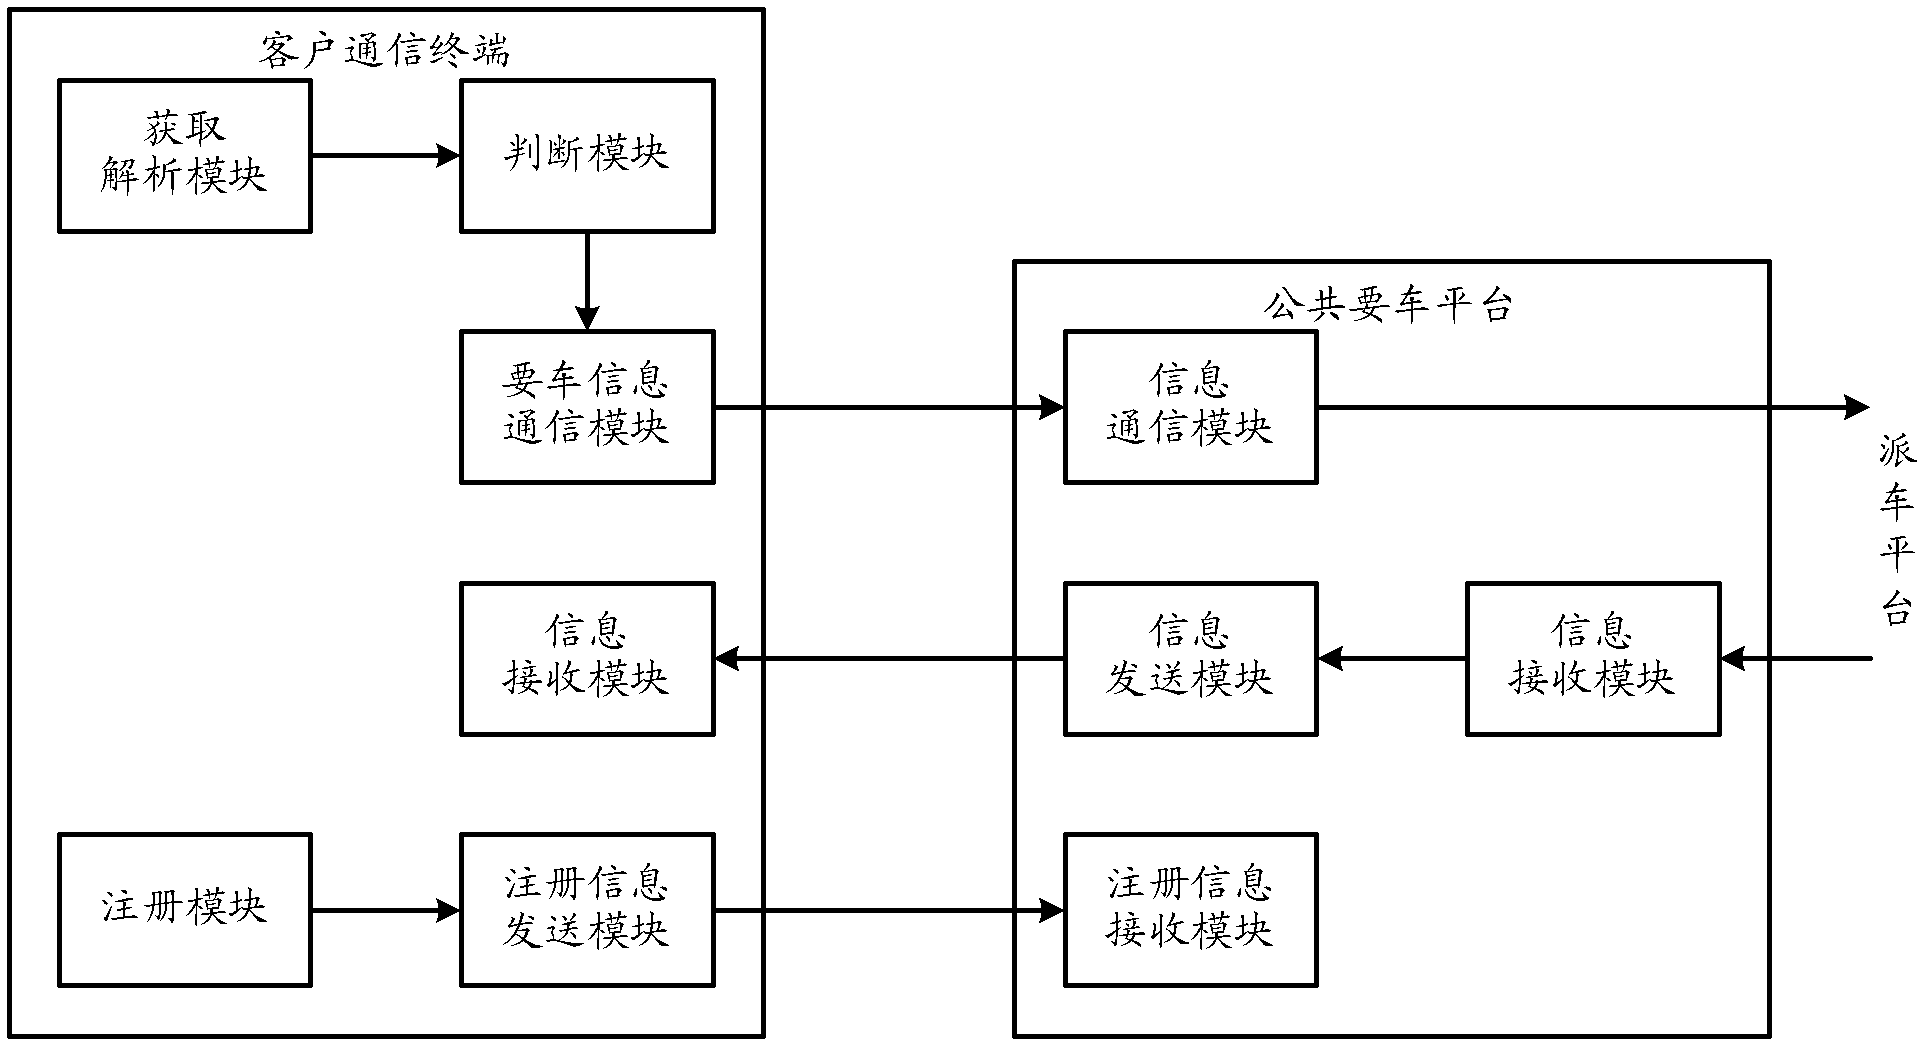 Taxi service system and method based on two-dimensional codes